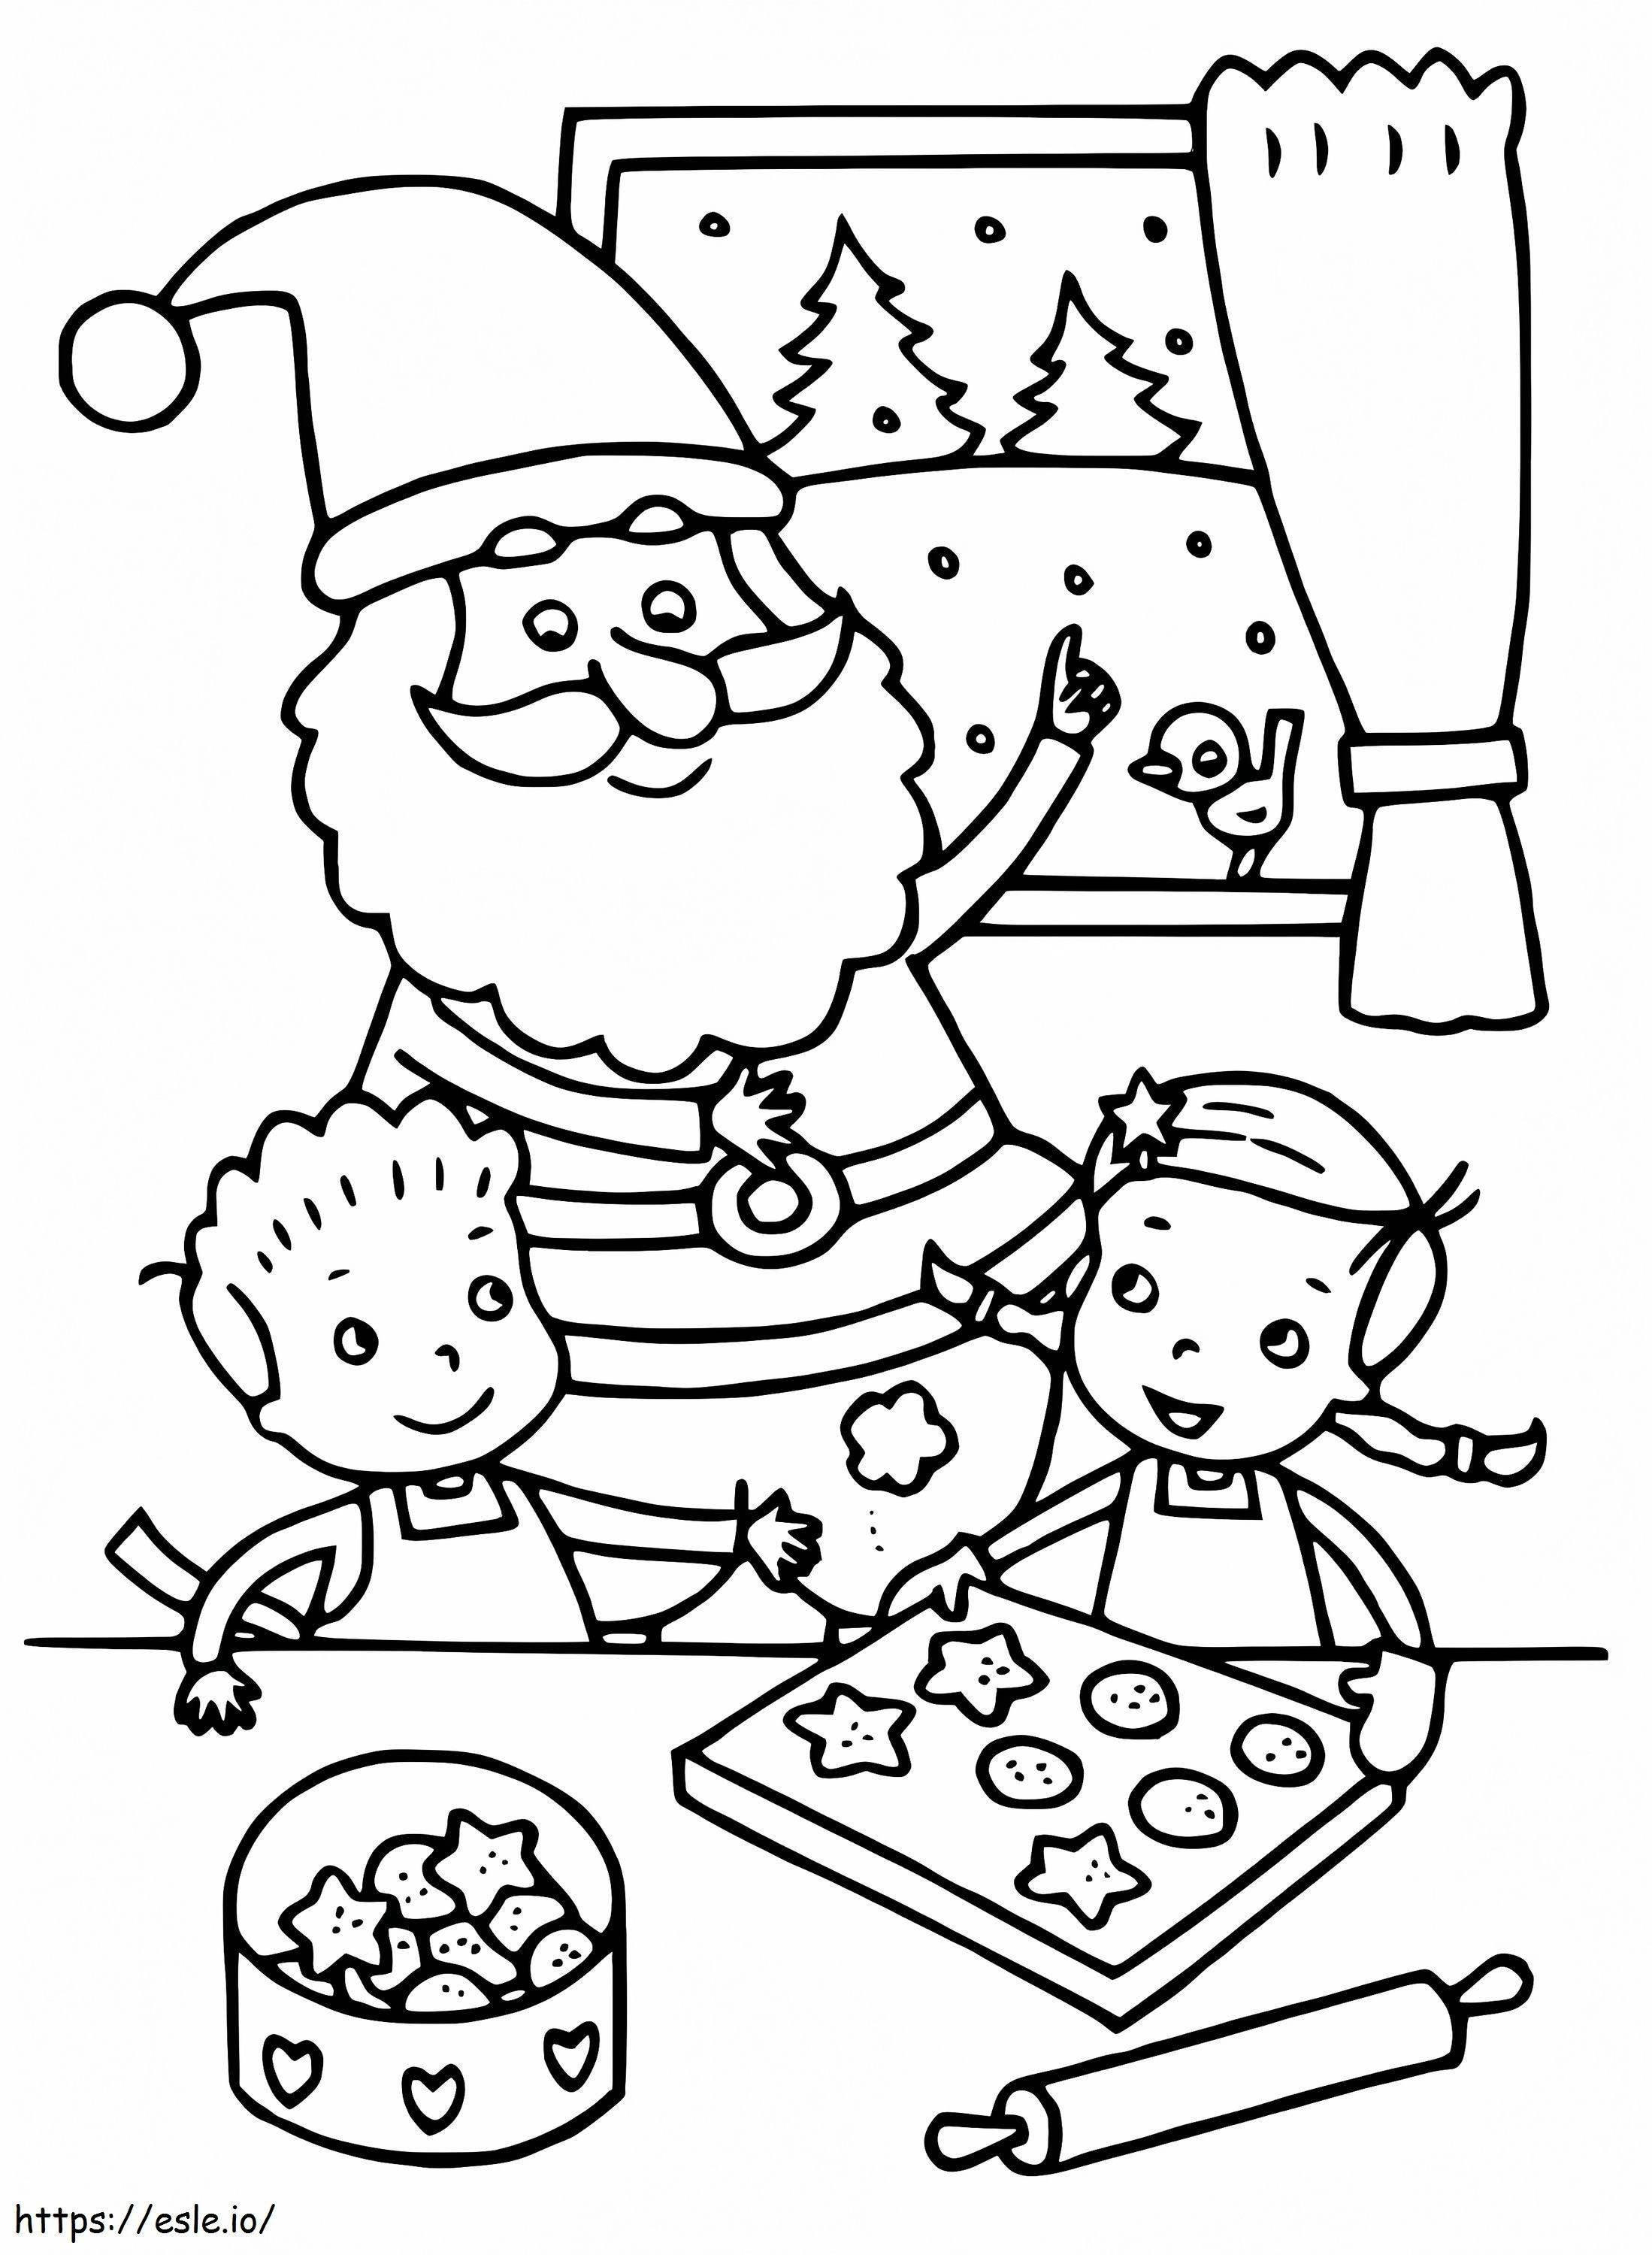 Making Christmas Cookies coloring page